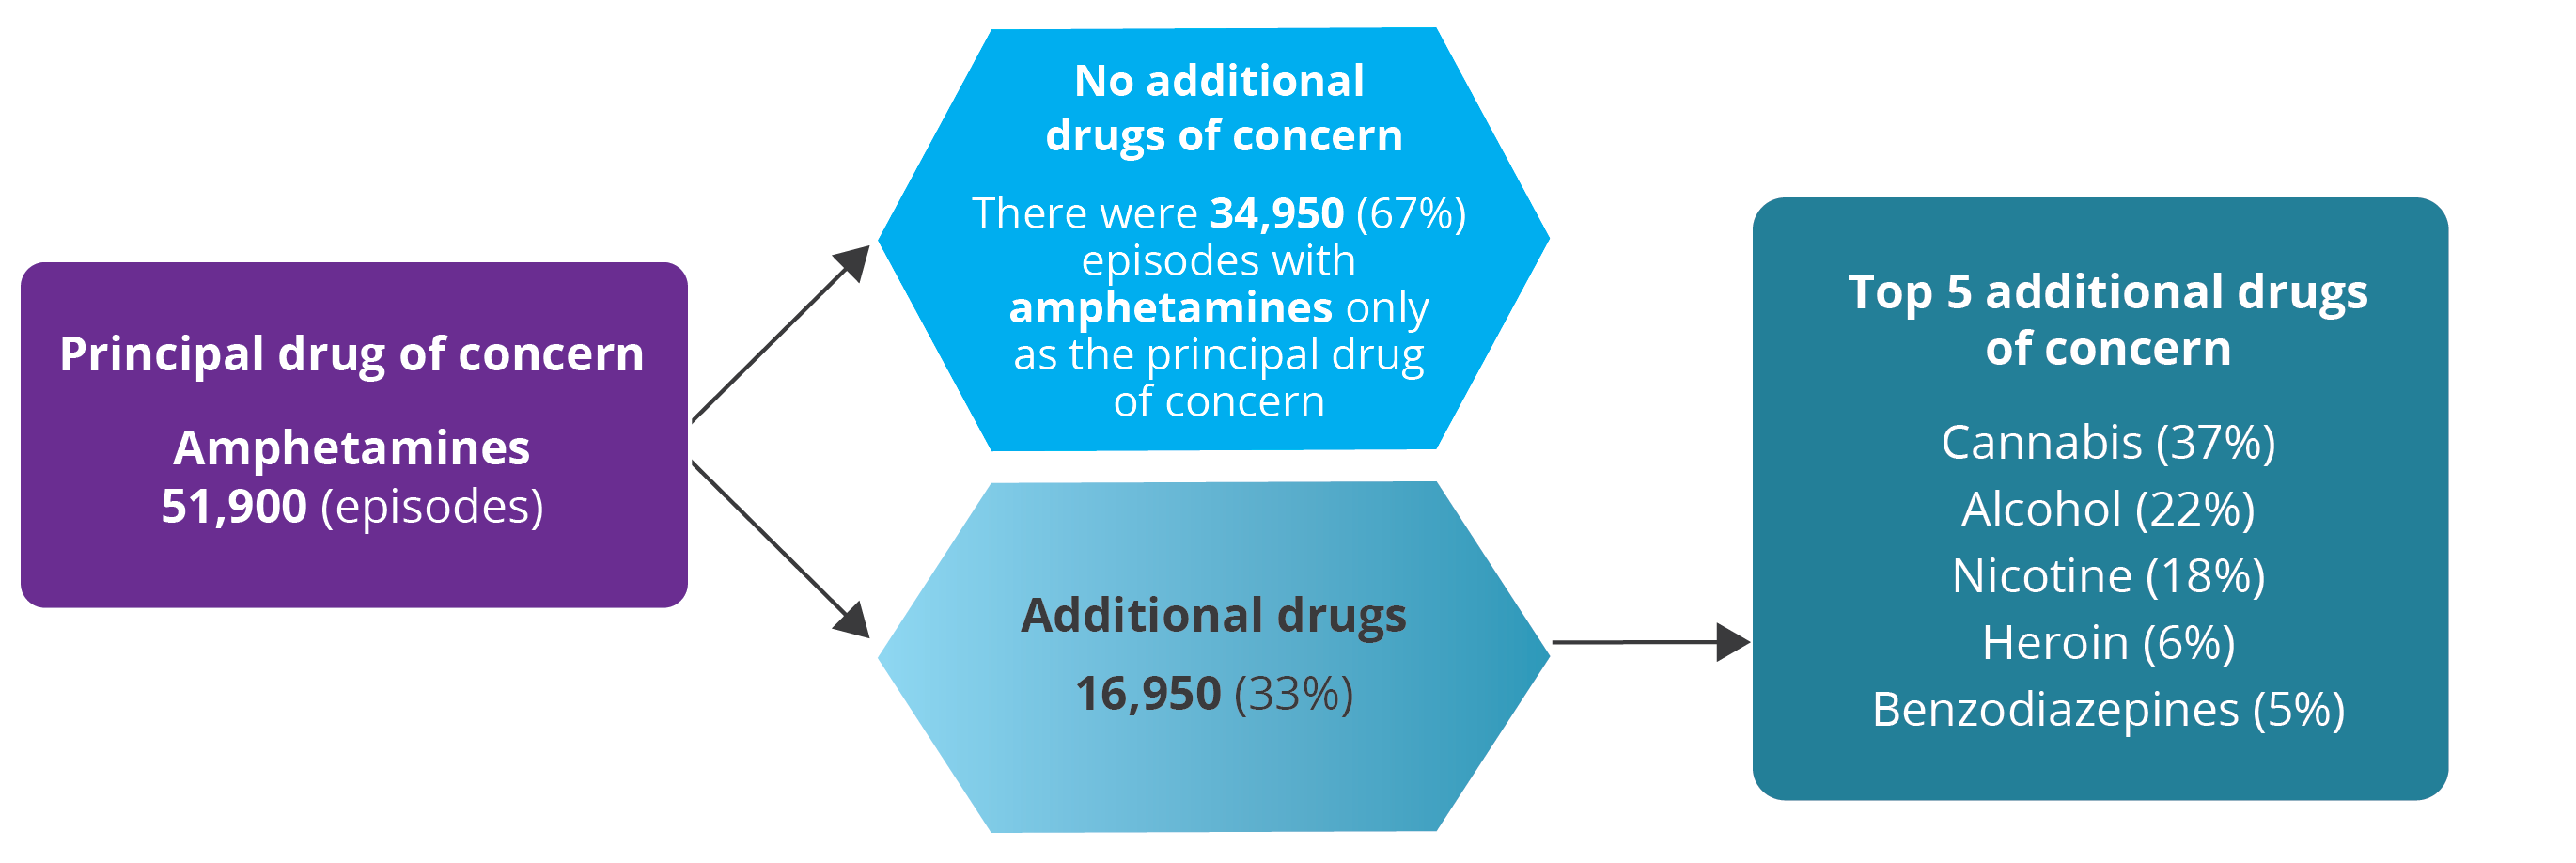 The flow chart shows amphetamines as a principal drug of concern broken down by additional drugs of concern.